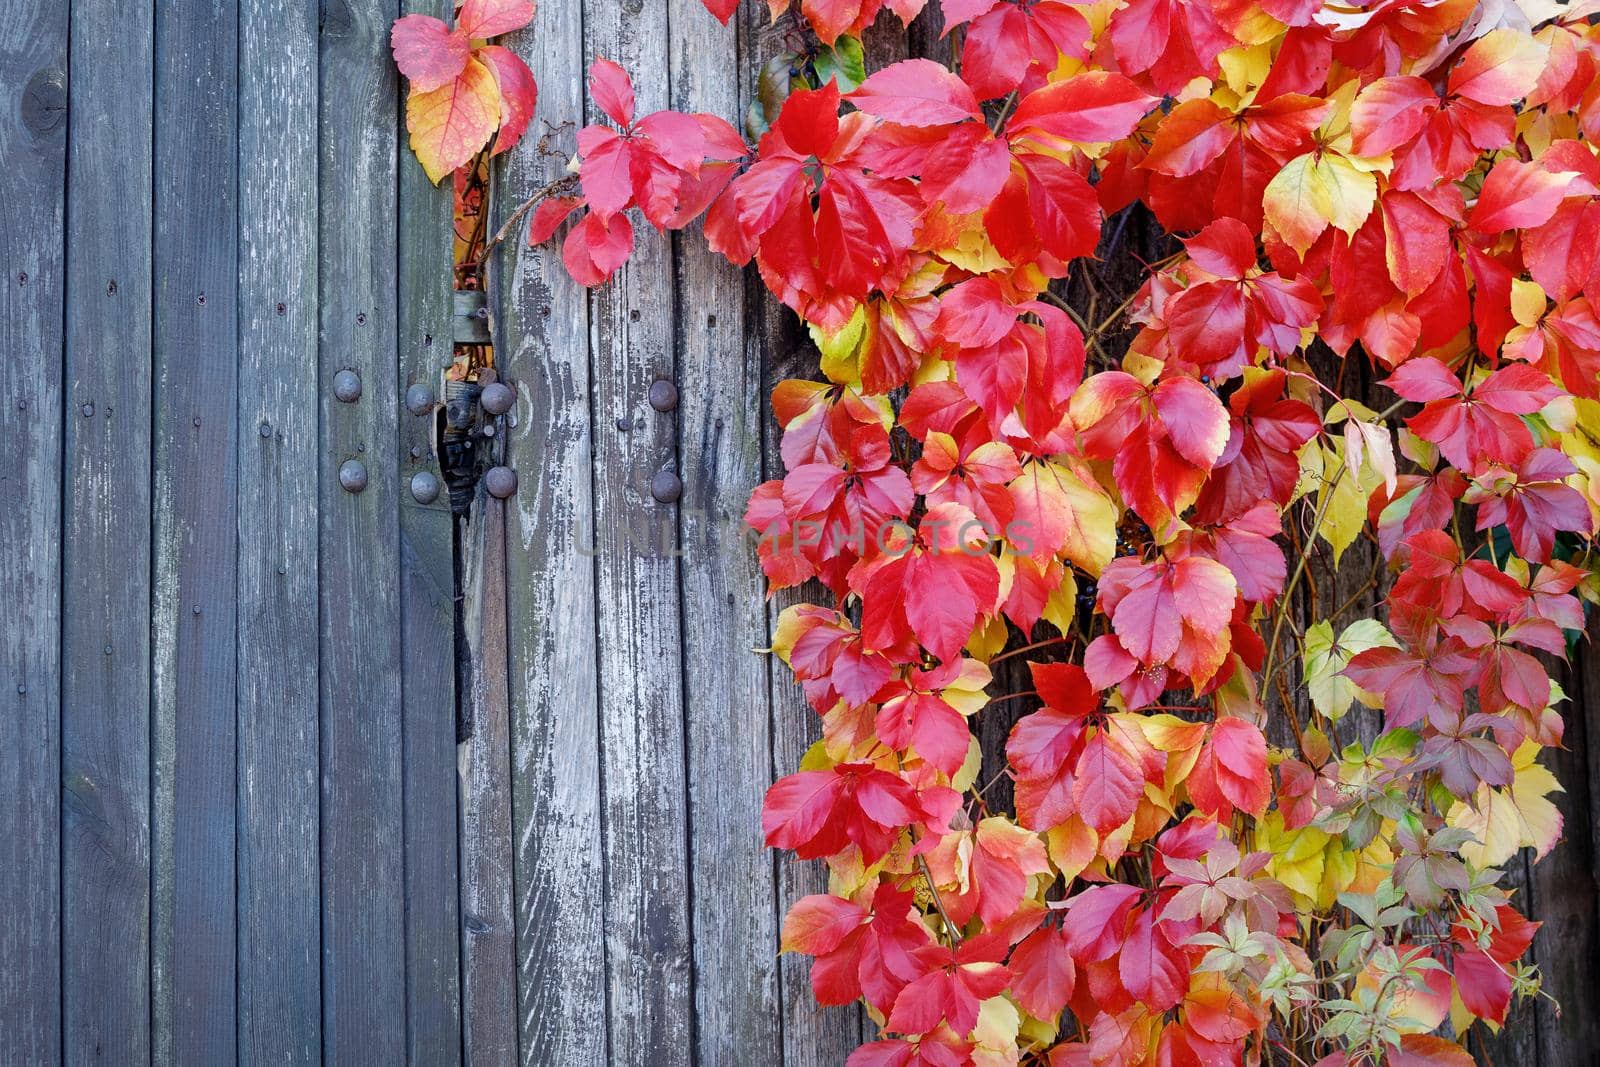 Beautiful plant with red autumn leaves on wooden old board fence. There is free space for text in the image.